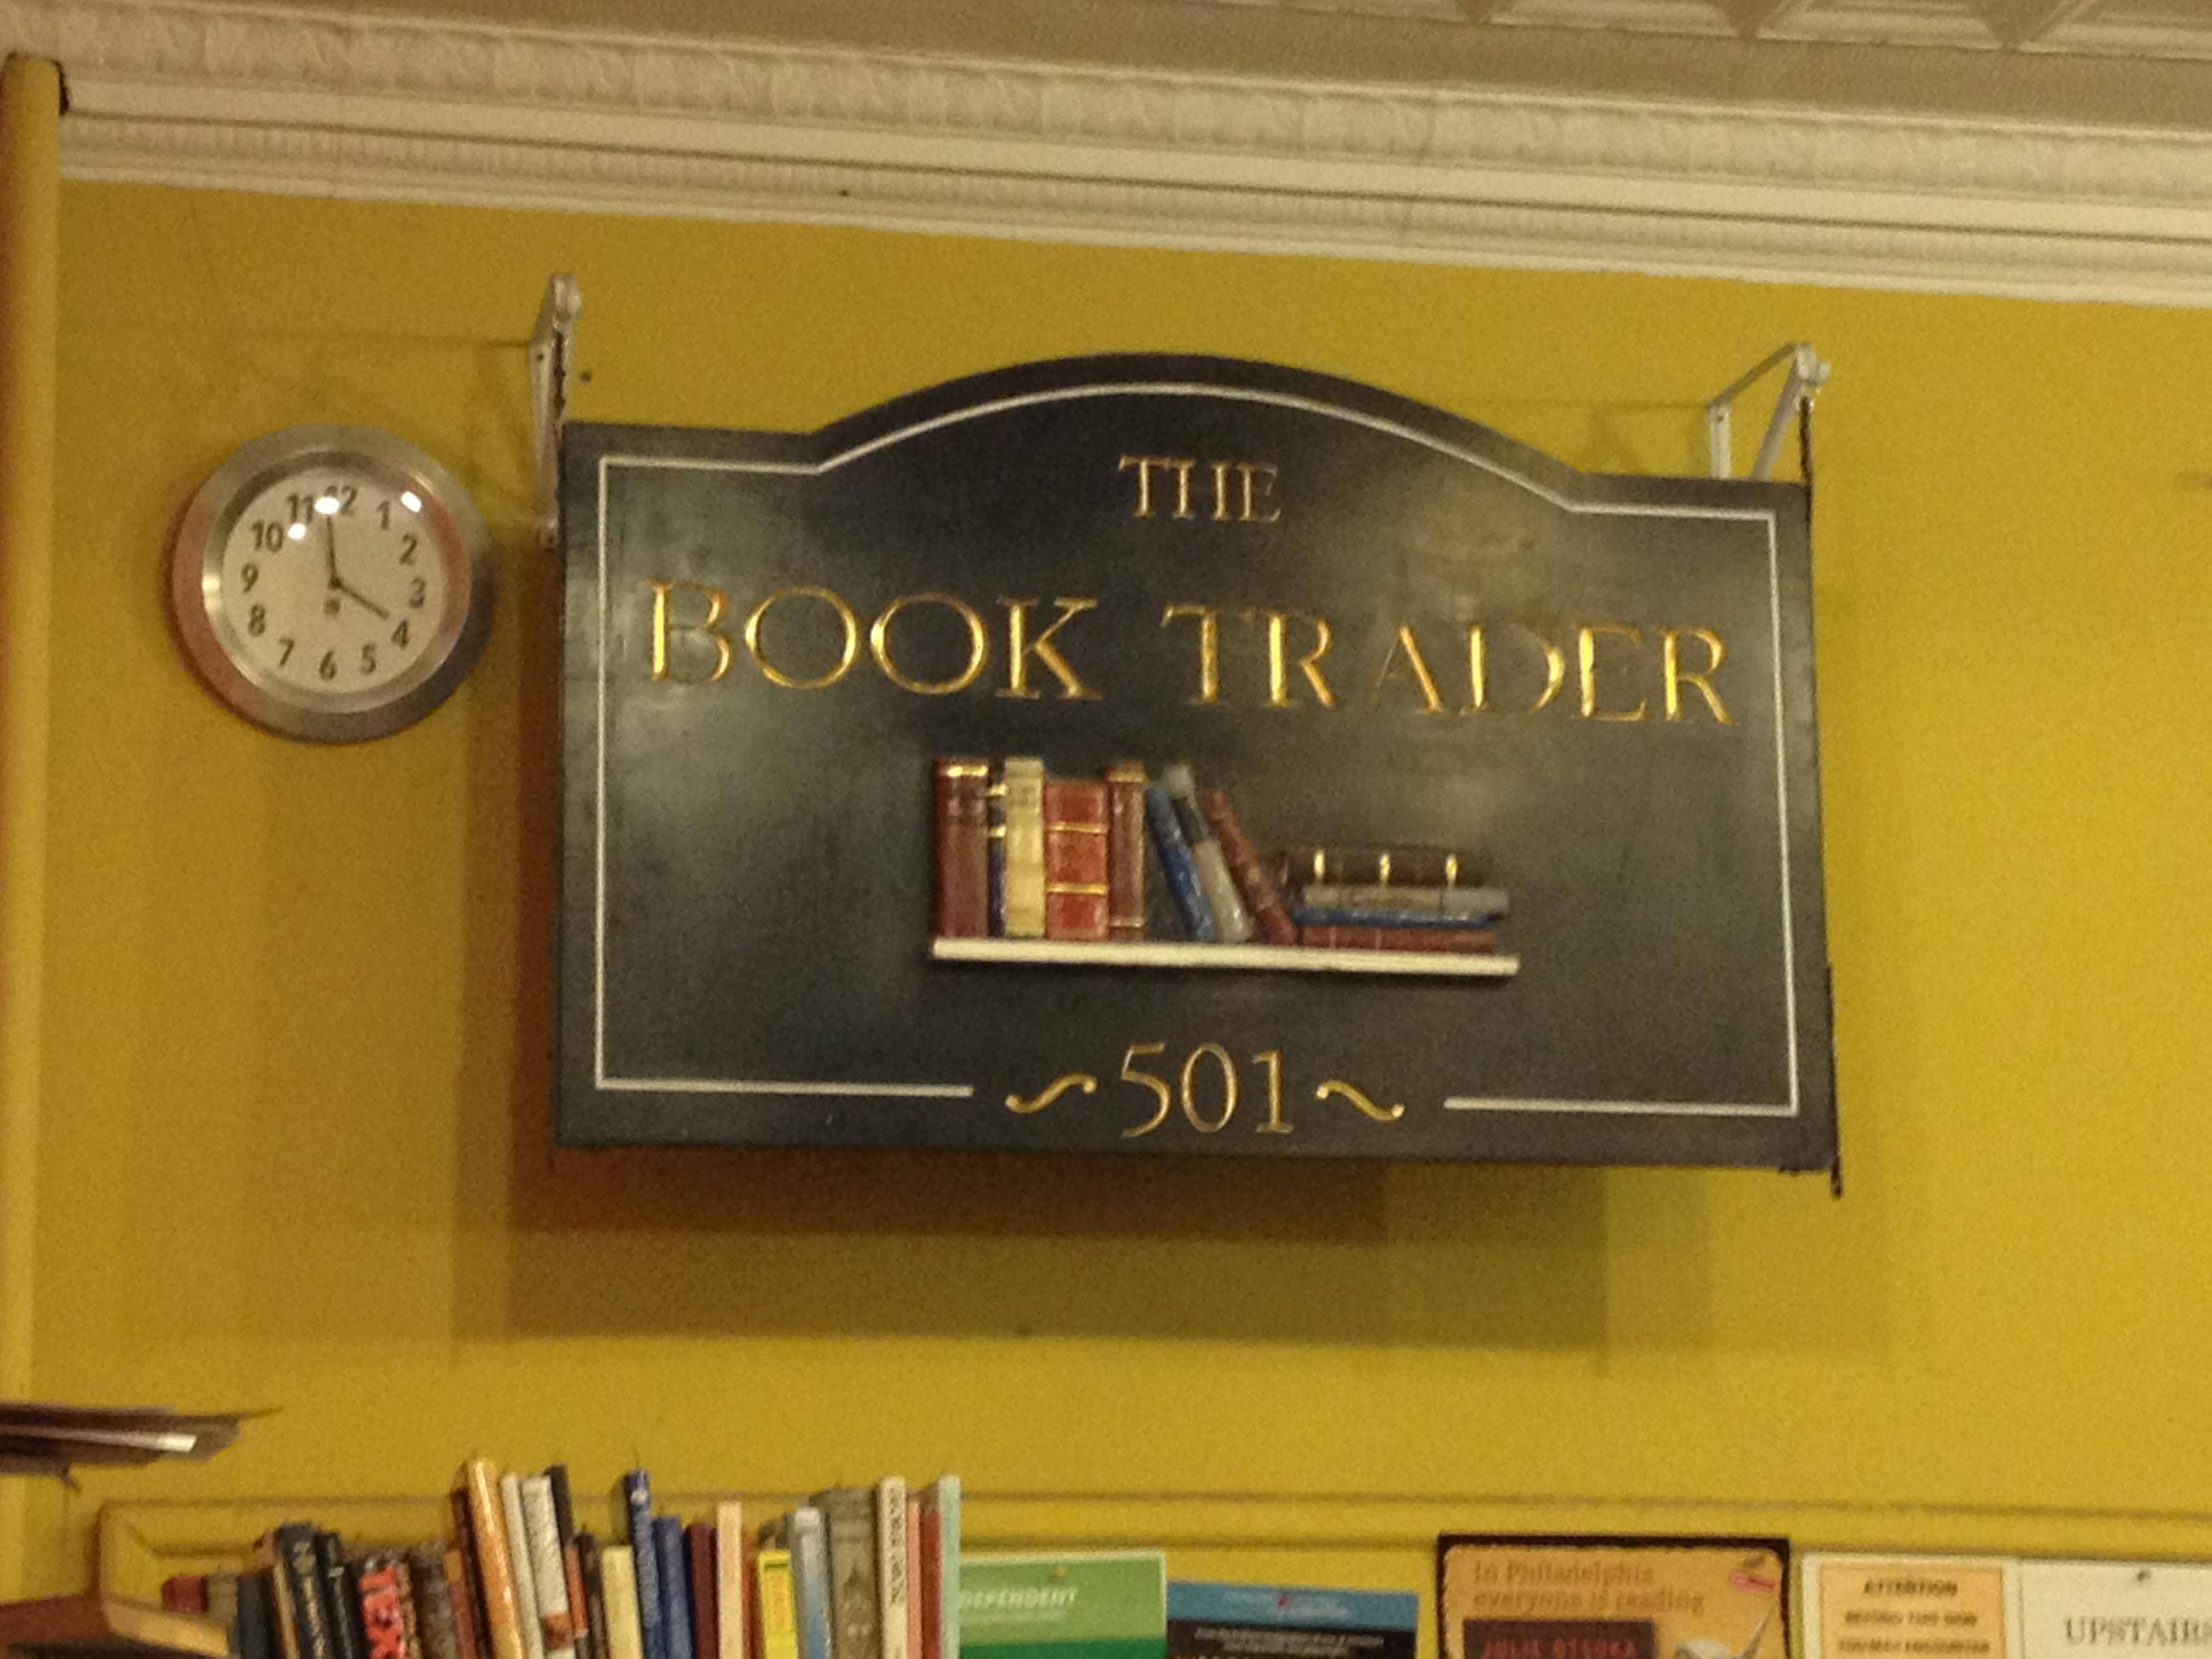 Cover image of this place The Book Trader